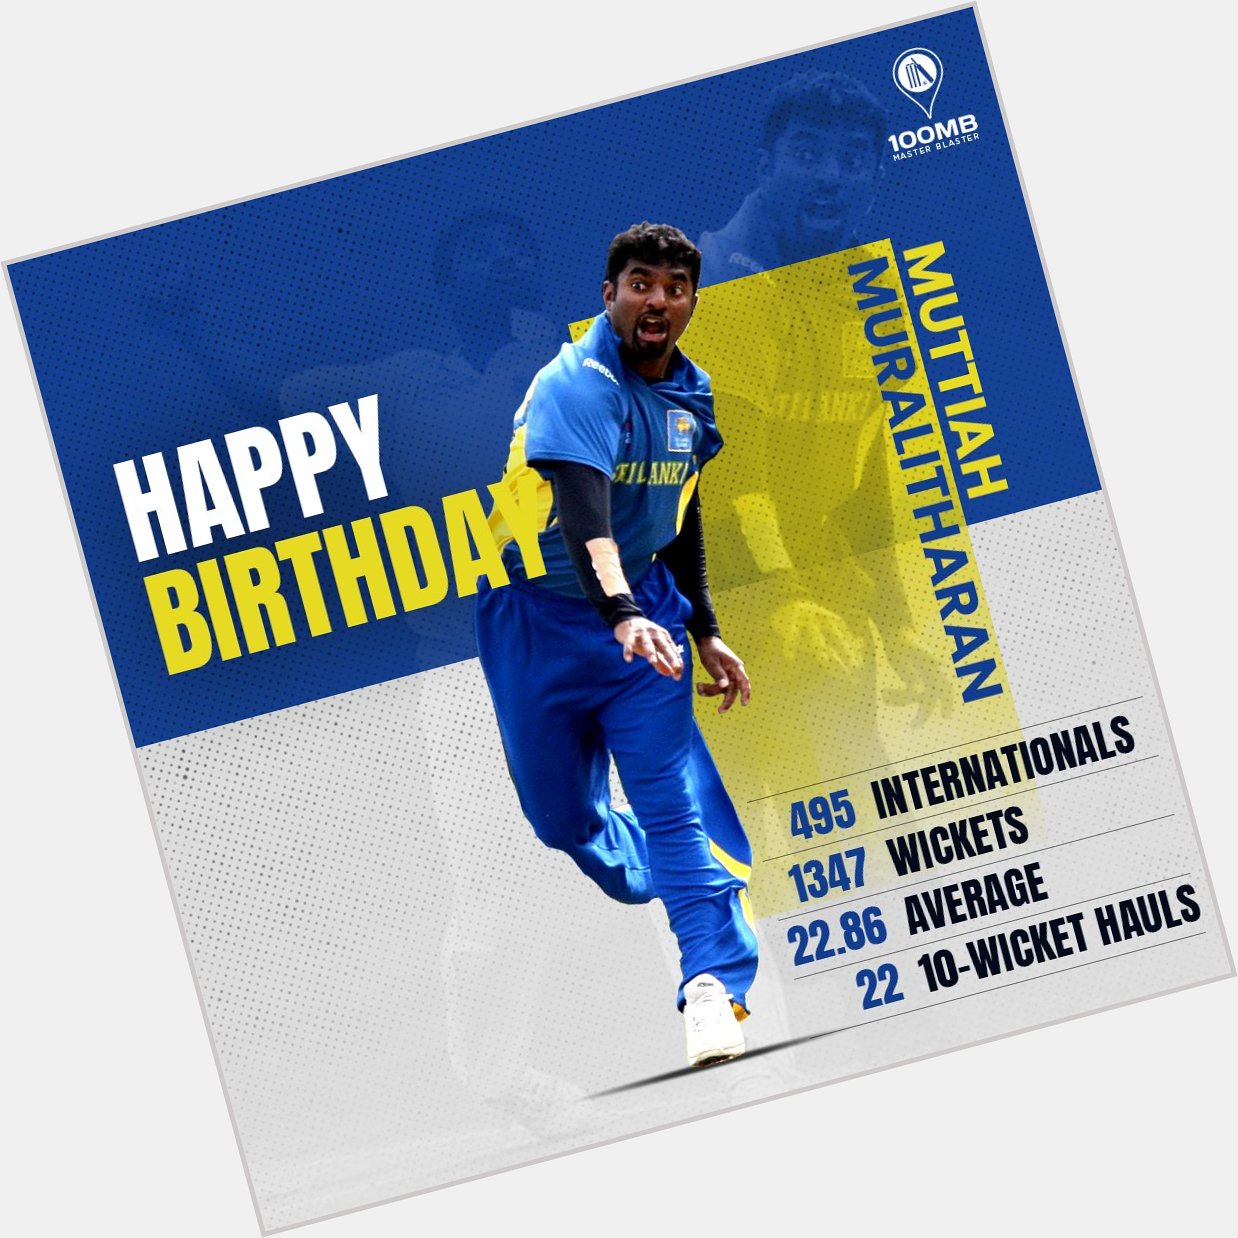 Happy birthday to Muttiah Muralitharan - the legend with the most international wickets in cricket\s history 